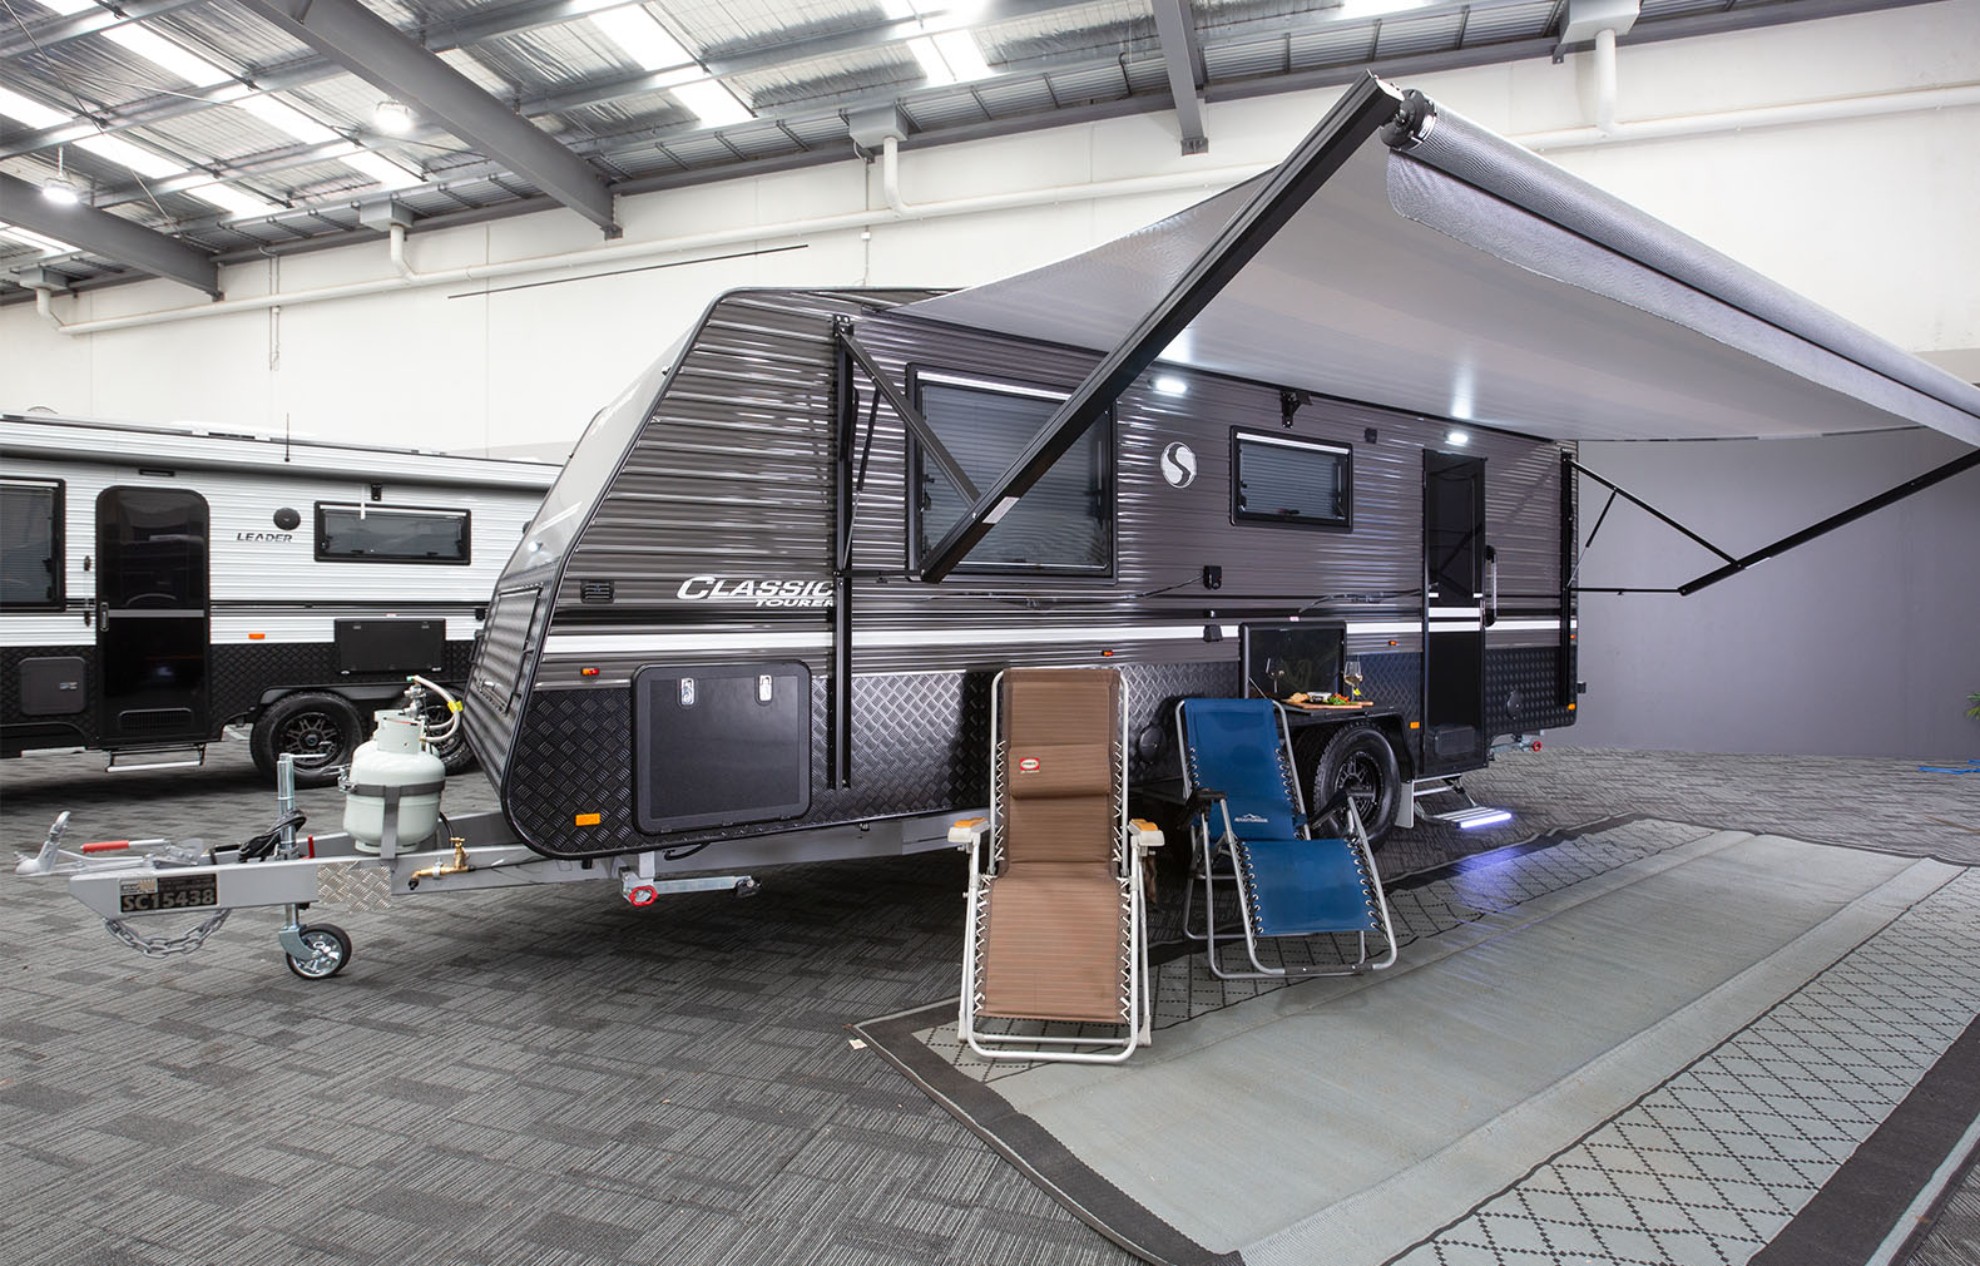 the classic tourer stands out as an affordable yet luxurious trailer camper 3